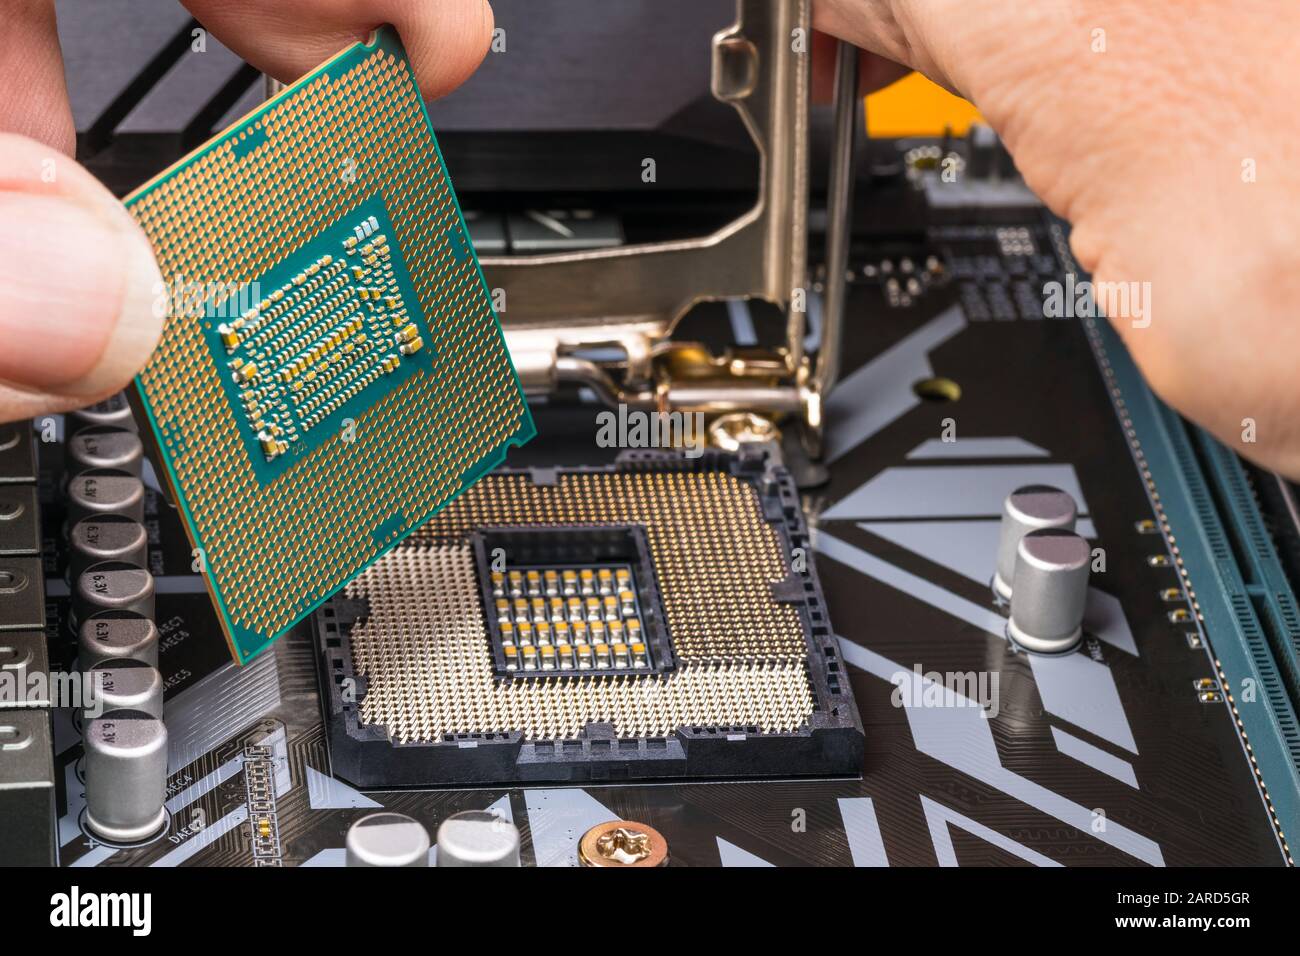 Computer processor maintenance detail. Hands installing microprocessor chip. Replacement of central processing unit in mainboard socket. Hardware part. Stock Photo